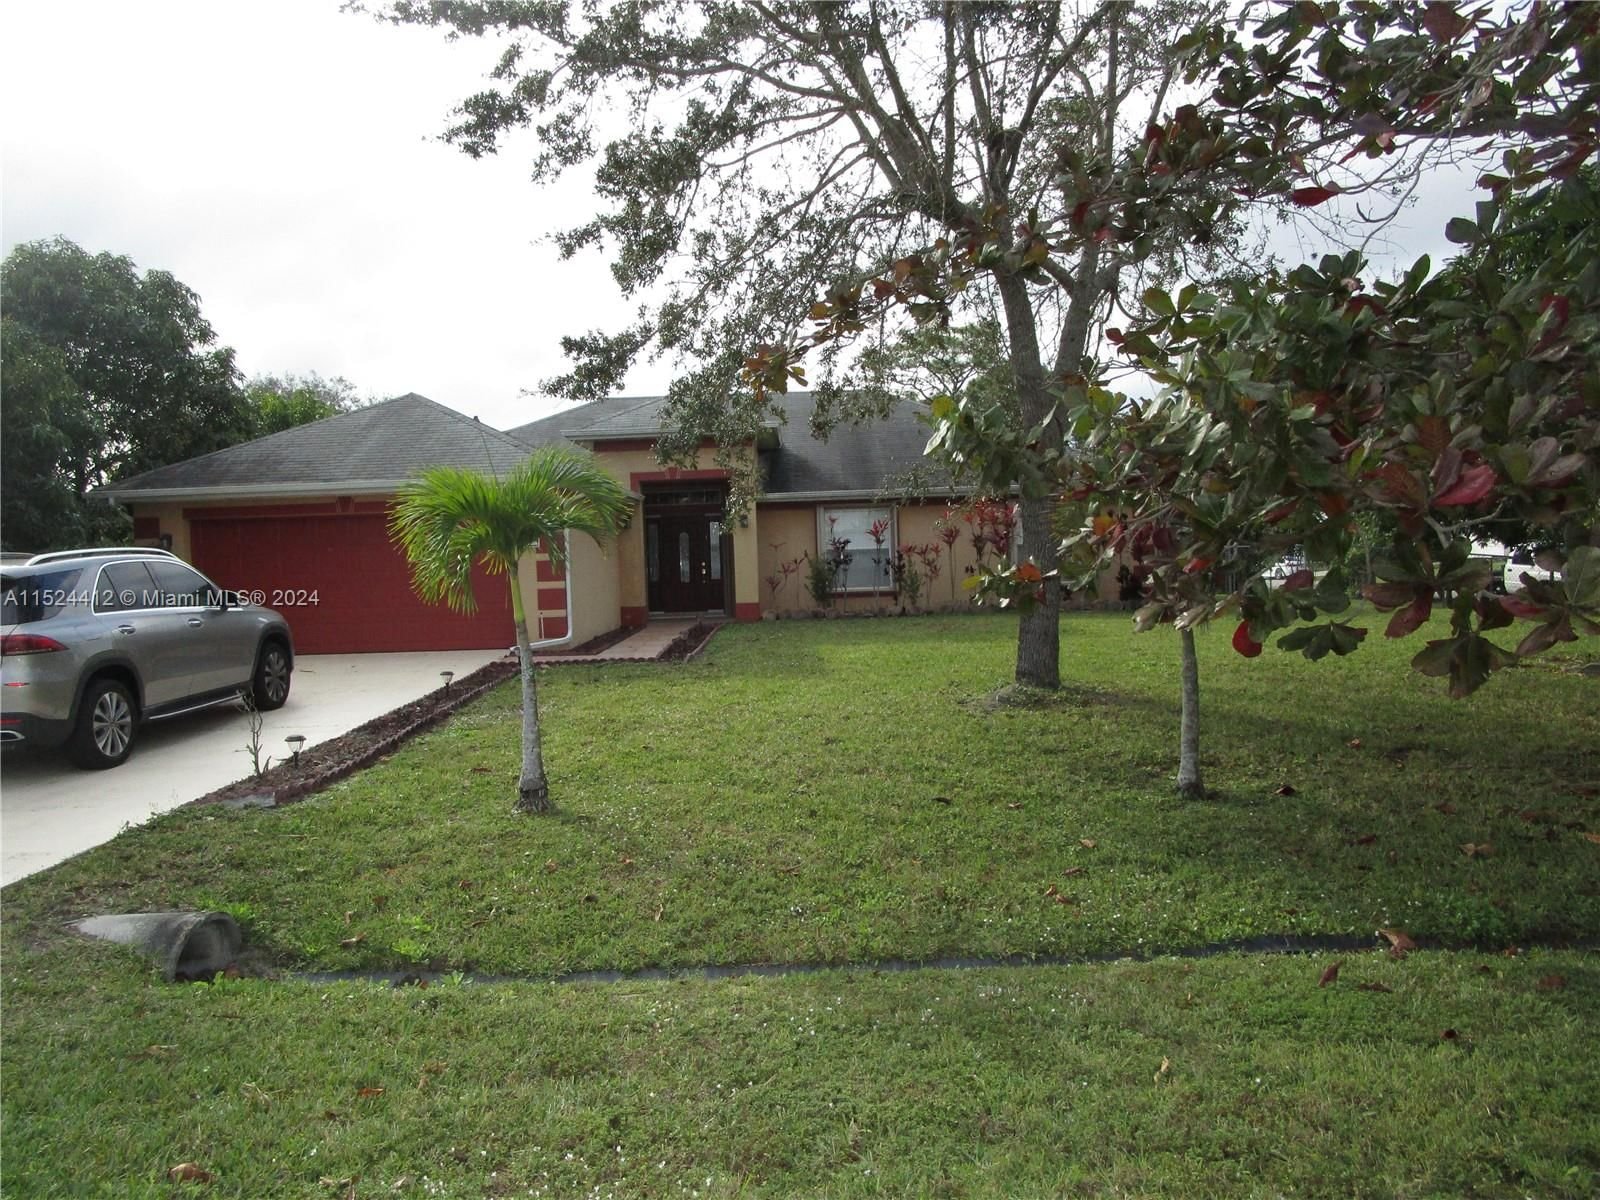 Real estate property located at 590 Conover St, St Lucie County, PORT ST LUCIE SECTION 25, Port St. Lucie, FL